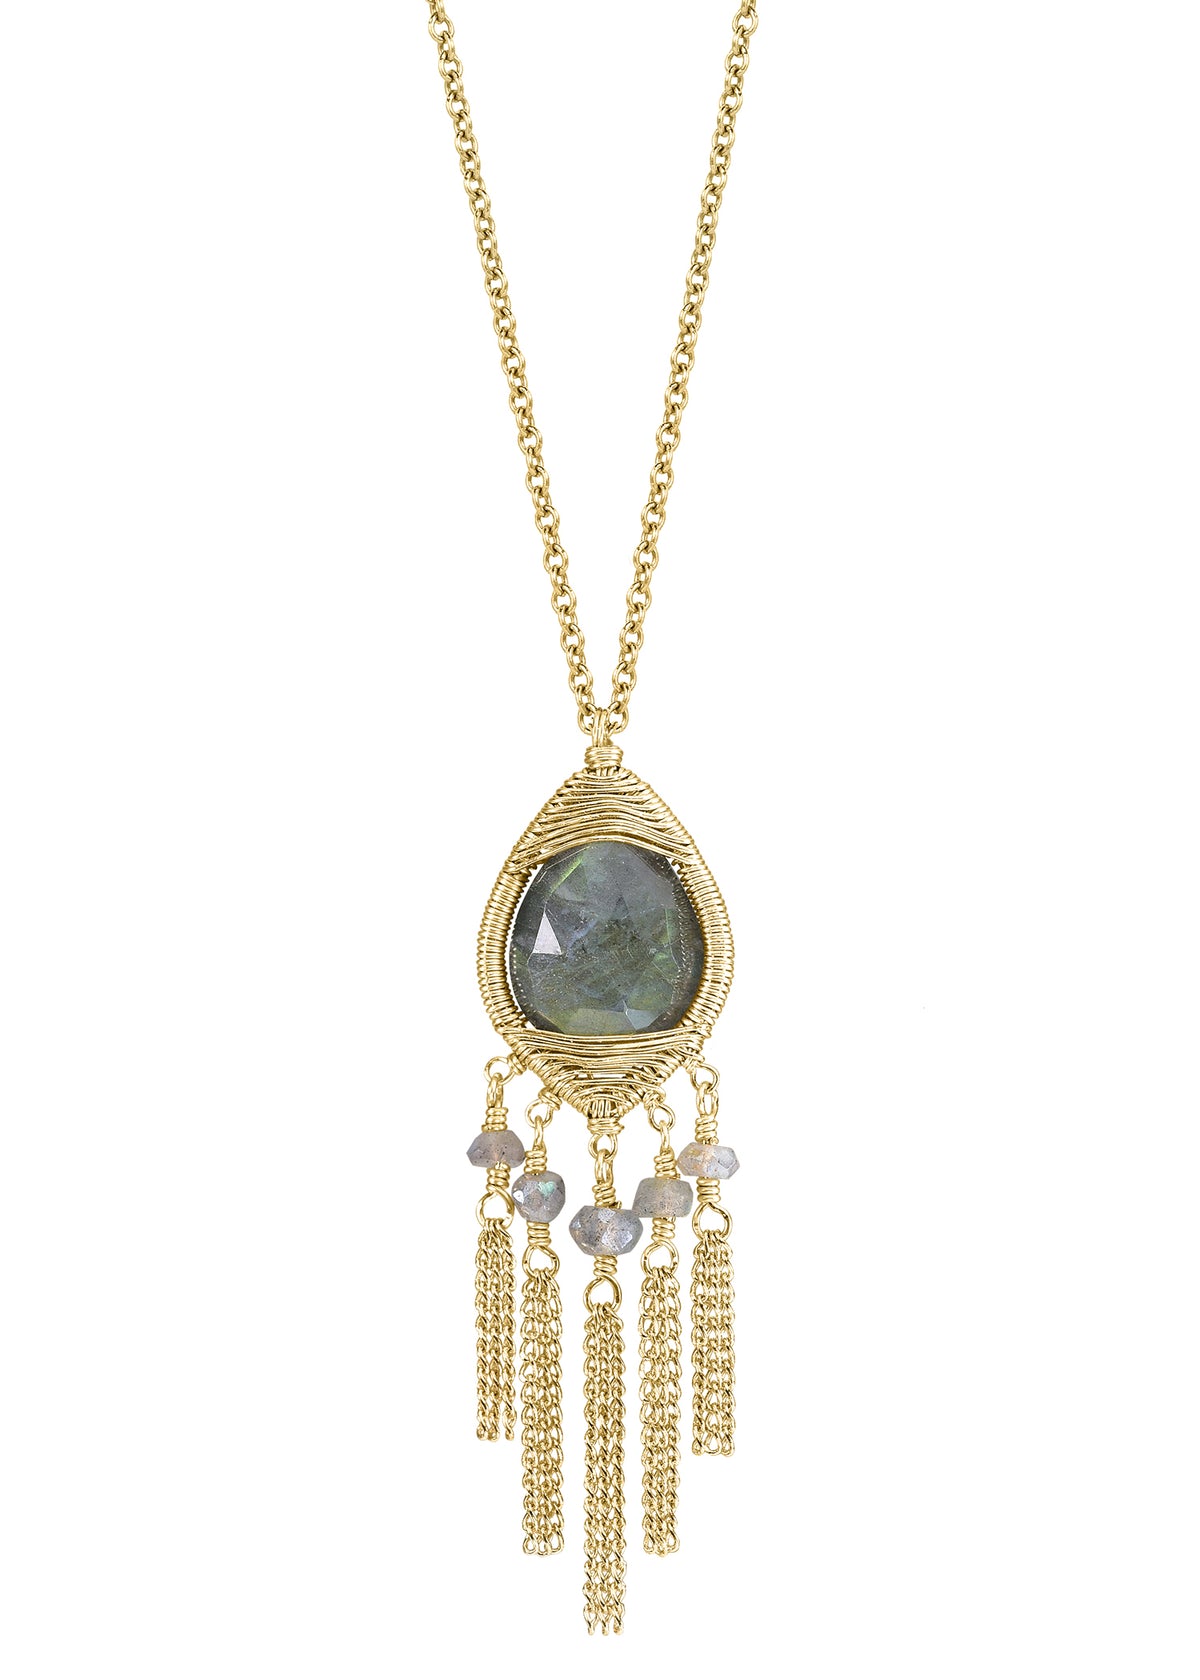 Labradorite 14k gold fill Necklace measures 18&quot; in length Pendant measures 1-3/4&quot; in length and 5/8&quot; in width across the widest point Handmade in our Los Angeles studio